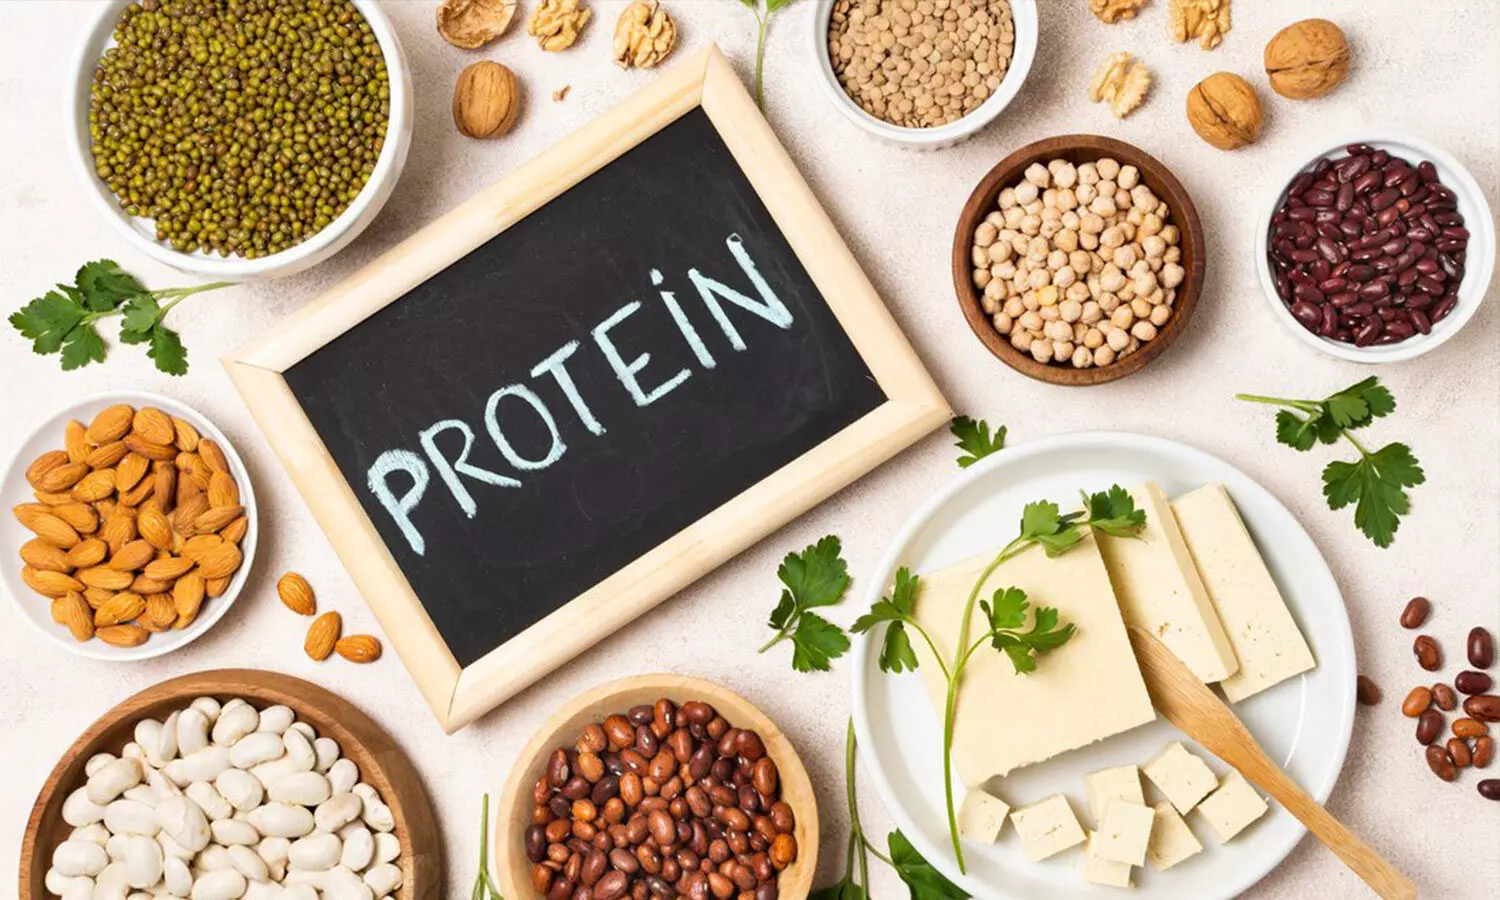 Effects of Excessive Protein Intake on the Body - Finding the Right Balance of Protein Requirements